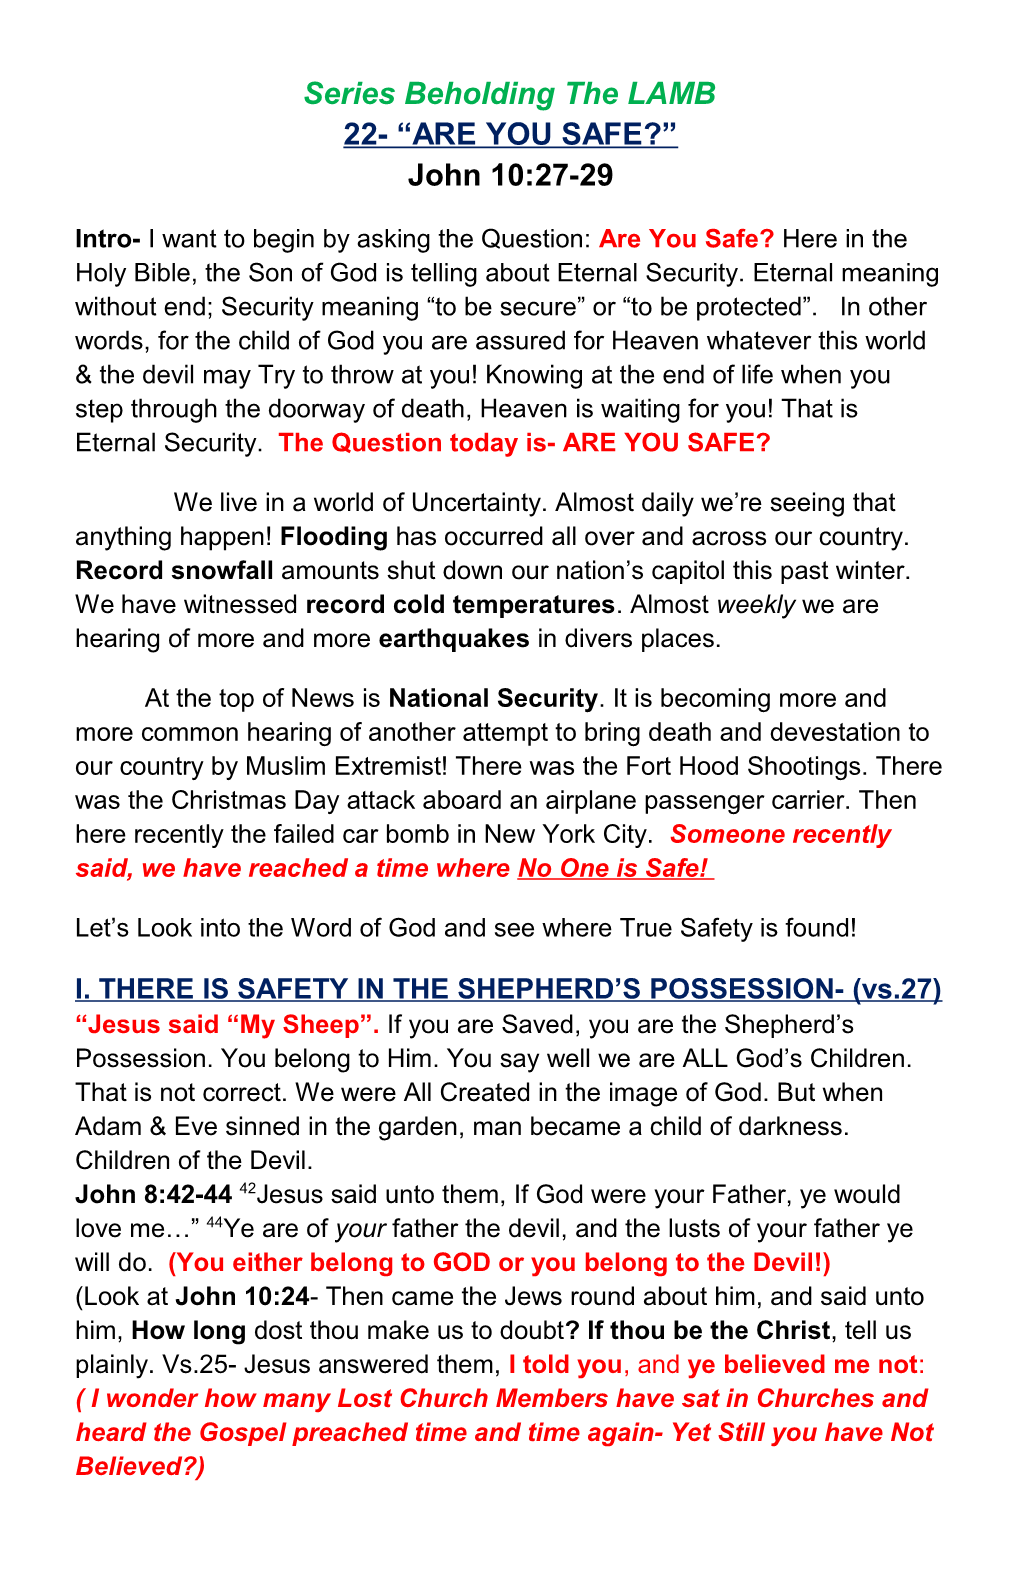 Series Beholding the LAMB 22- ARE YOU SAFE? John 10:27-29